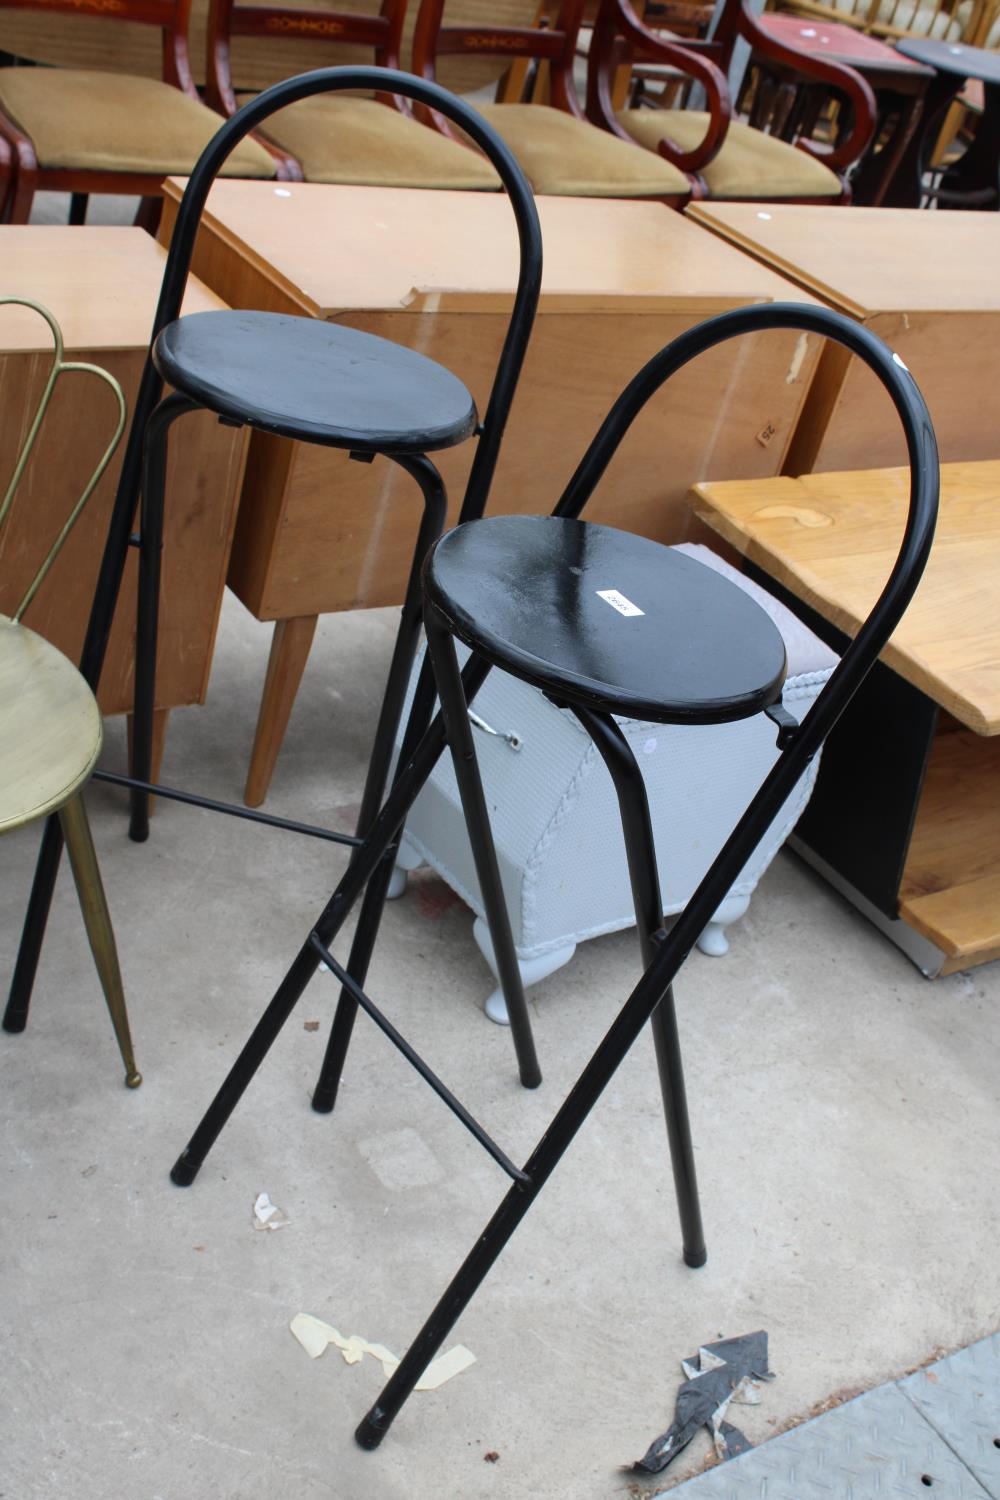 A PAIR OF HABITAT MACADAM FOLDING METAL STOOLS AND A METAL FRAMED FAN BACK CHAIR - Image 2 of 3